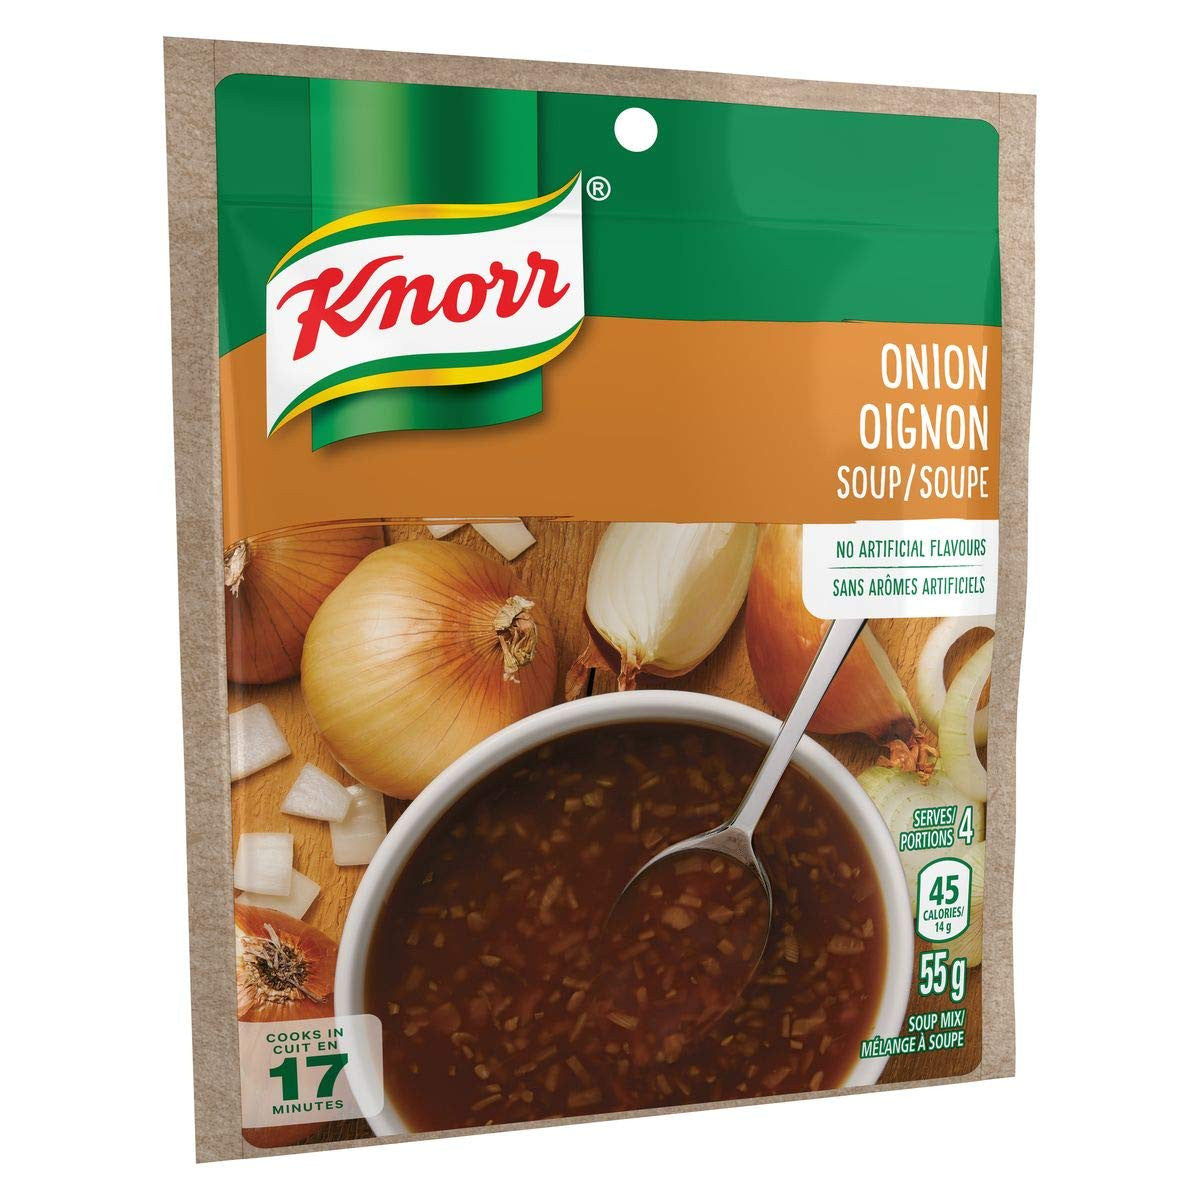 Knorr Onion Soup Mix 55g/1.9 oz., Pack of 12 {Imported from Canada}